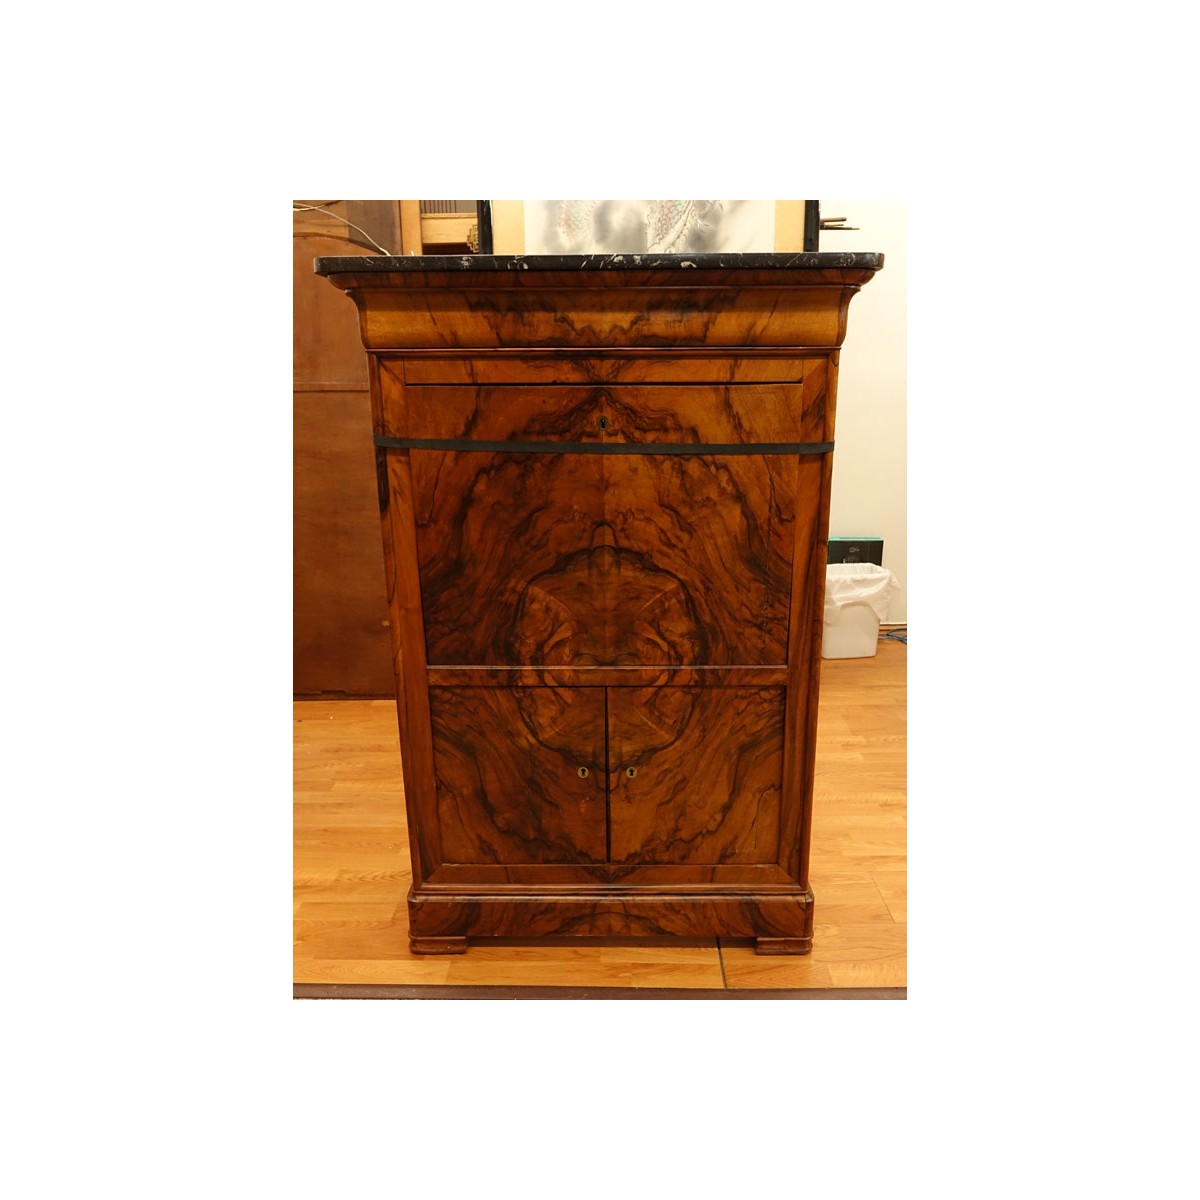 French Louis Philippe Burled Walnut Secretary Desk Cabinet with Marble Top. Drop front opens to rev